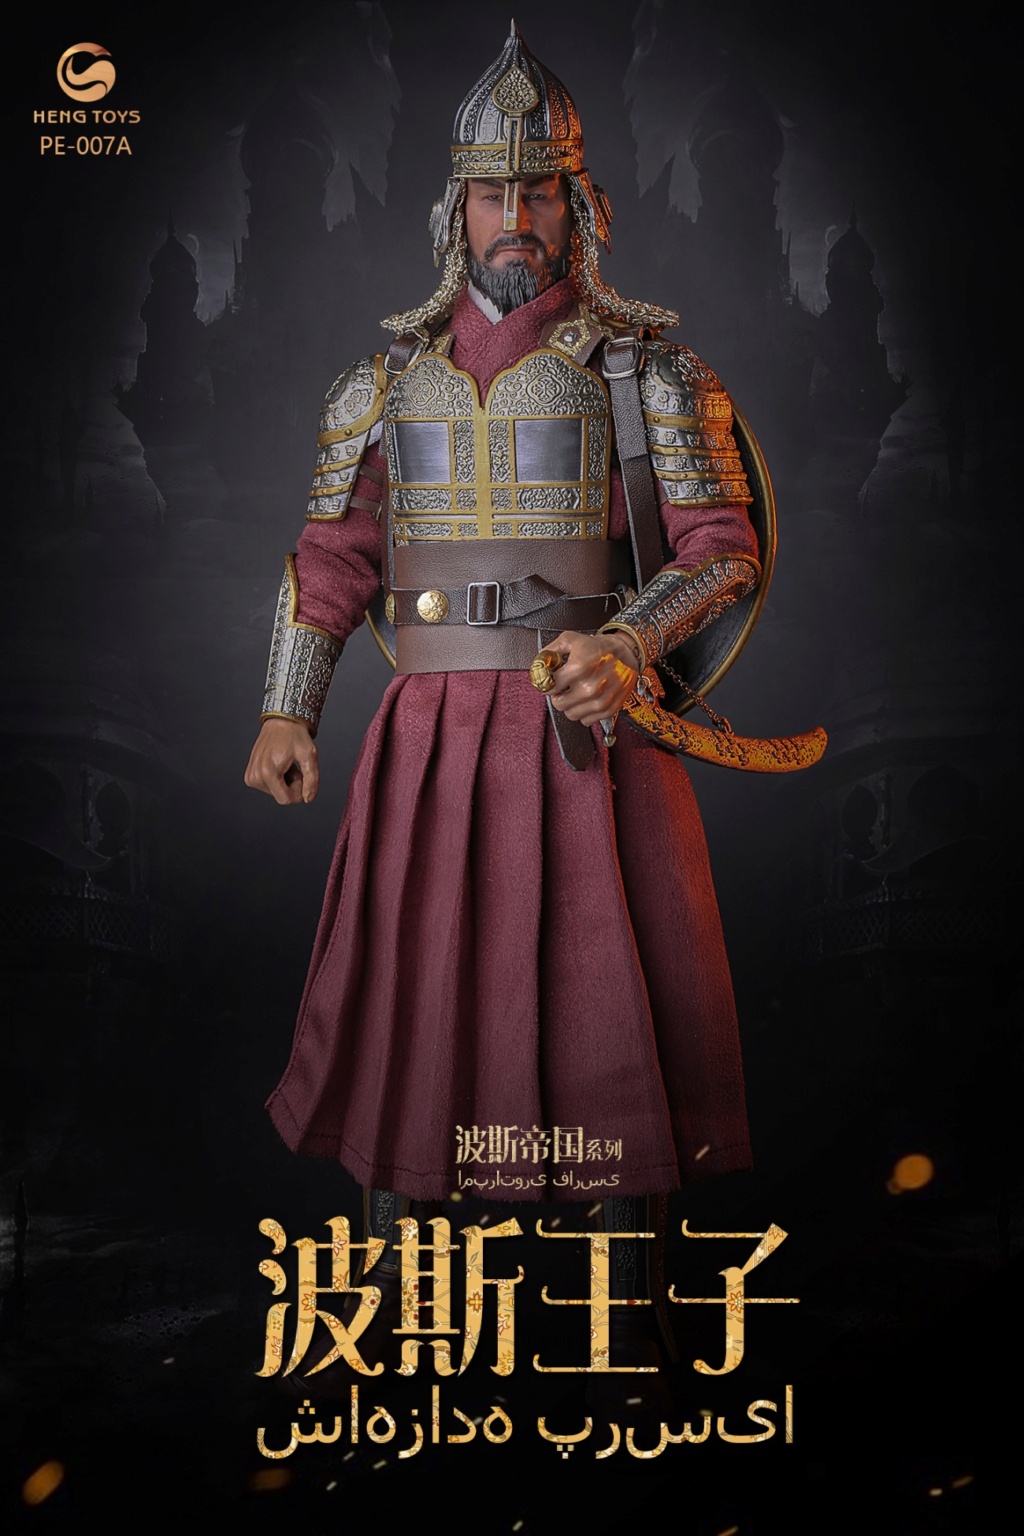 PersianEmpire - NEW PRODUCT: HengToys: 1/6 Persian Empire Series-Prince of Persia [A & B Section] (#PE-007) 16032411